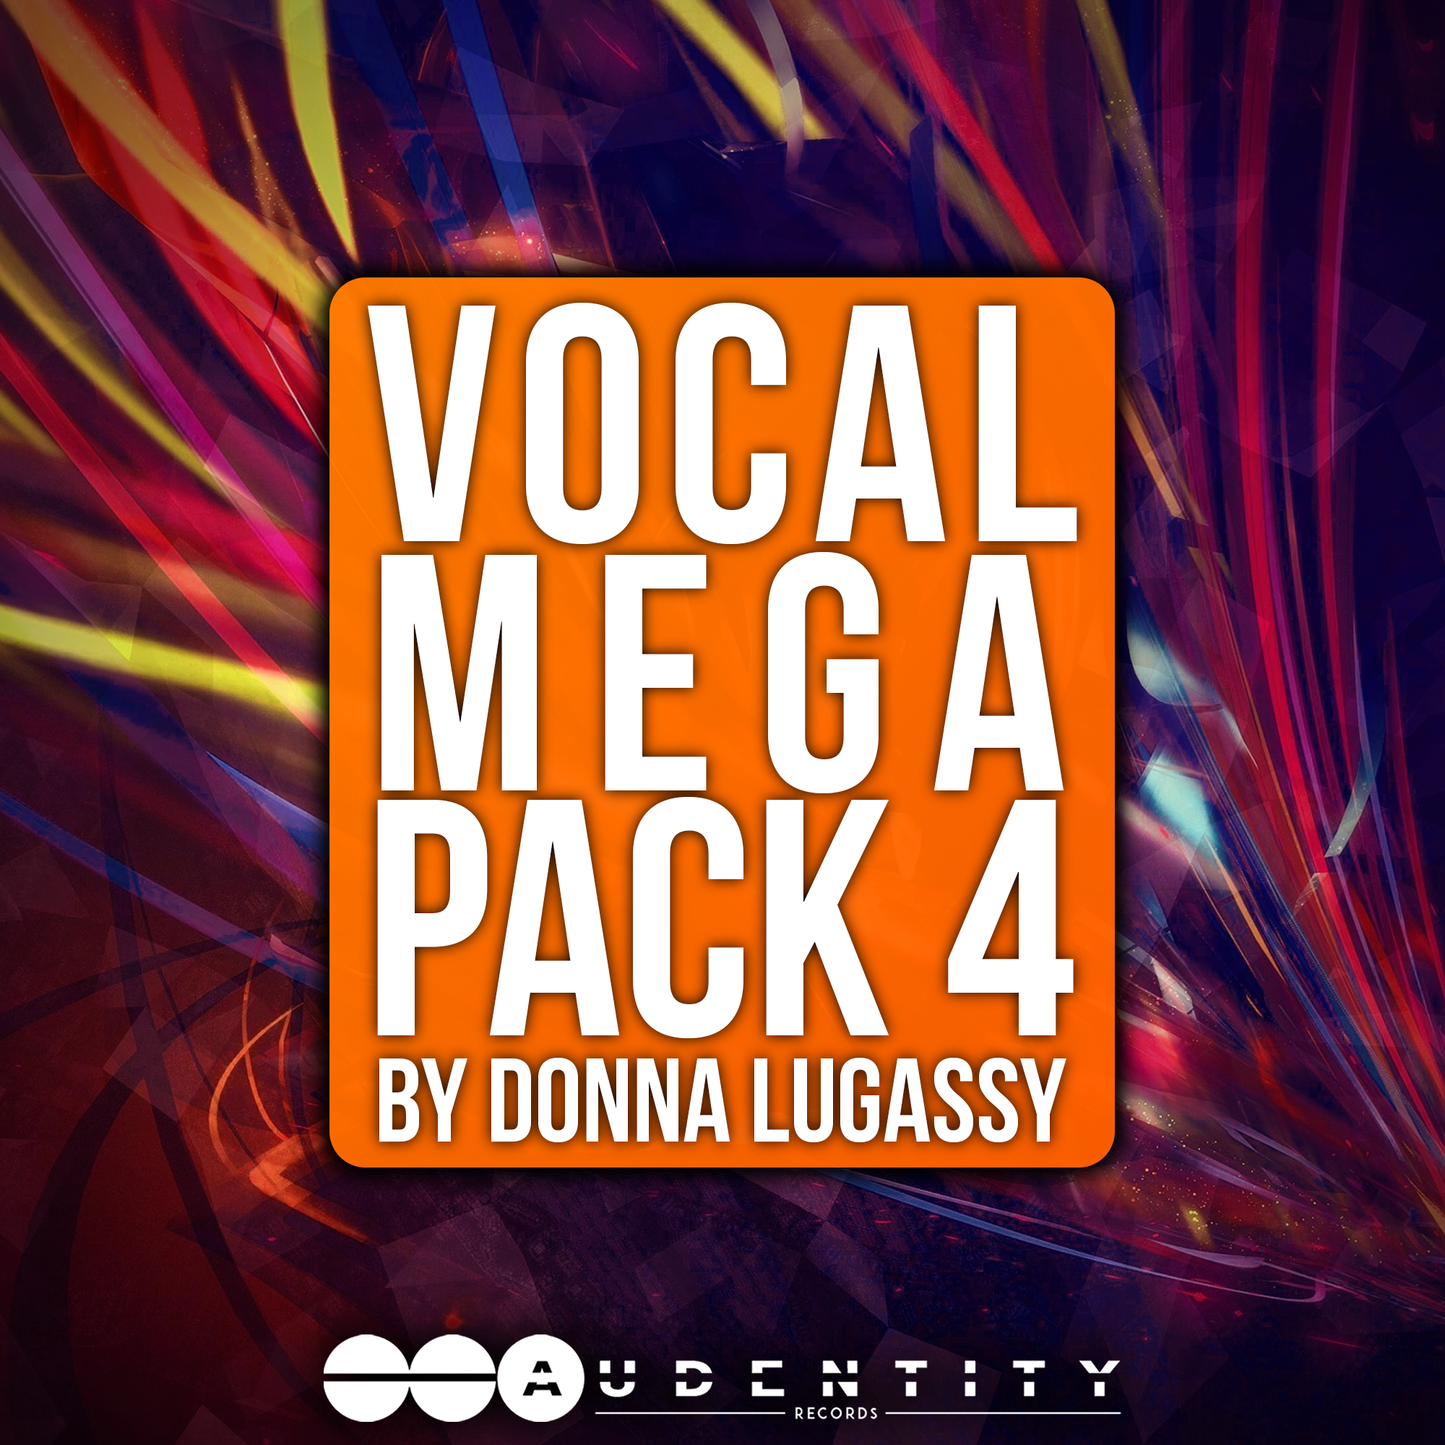 Vocal Sample Pack 4 contains vocal samples